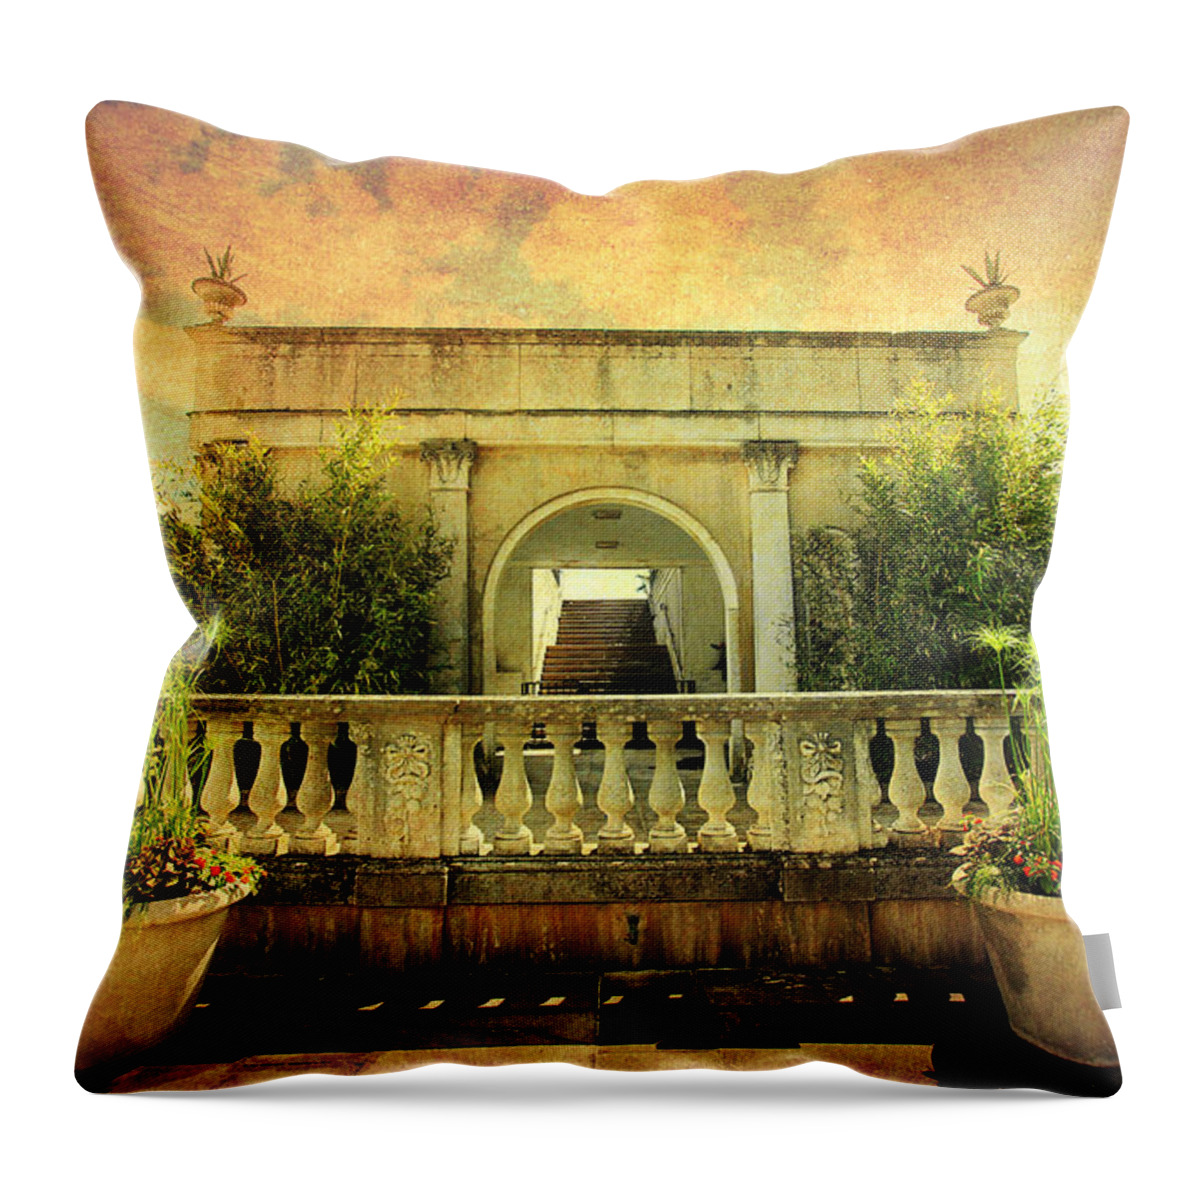 Gardens Throw Pillow featuring the photograph Heavenly Gardens by Trina Ansel